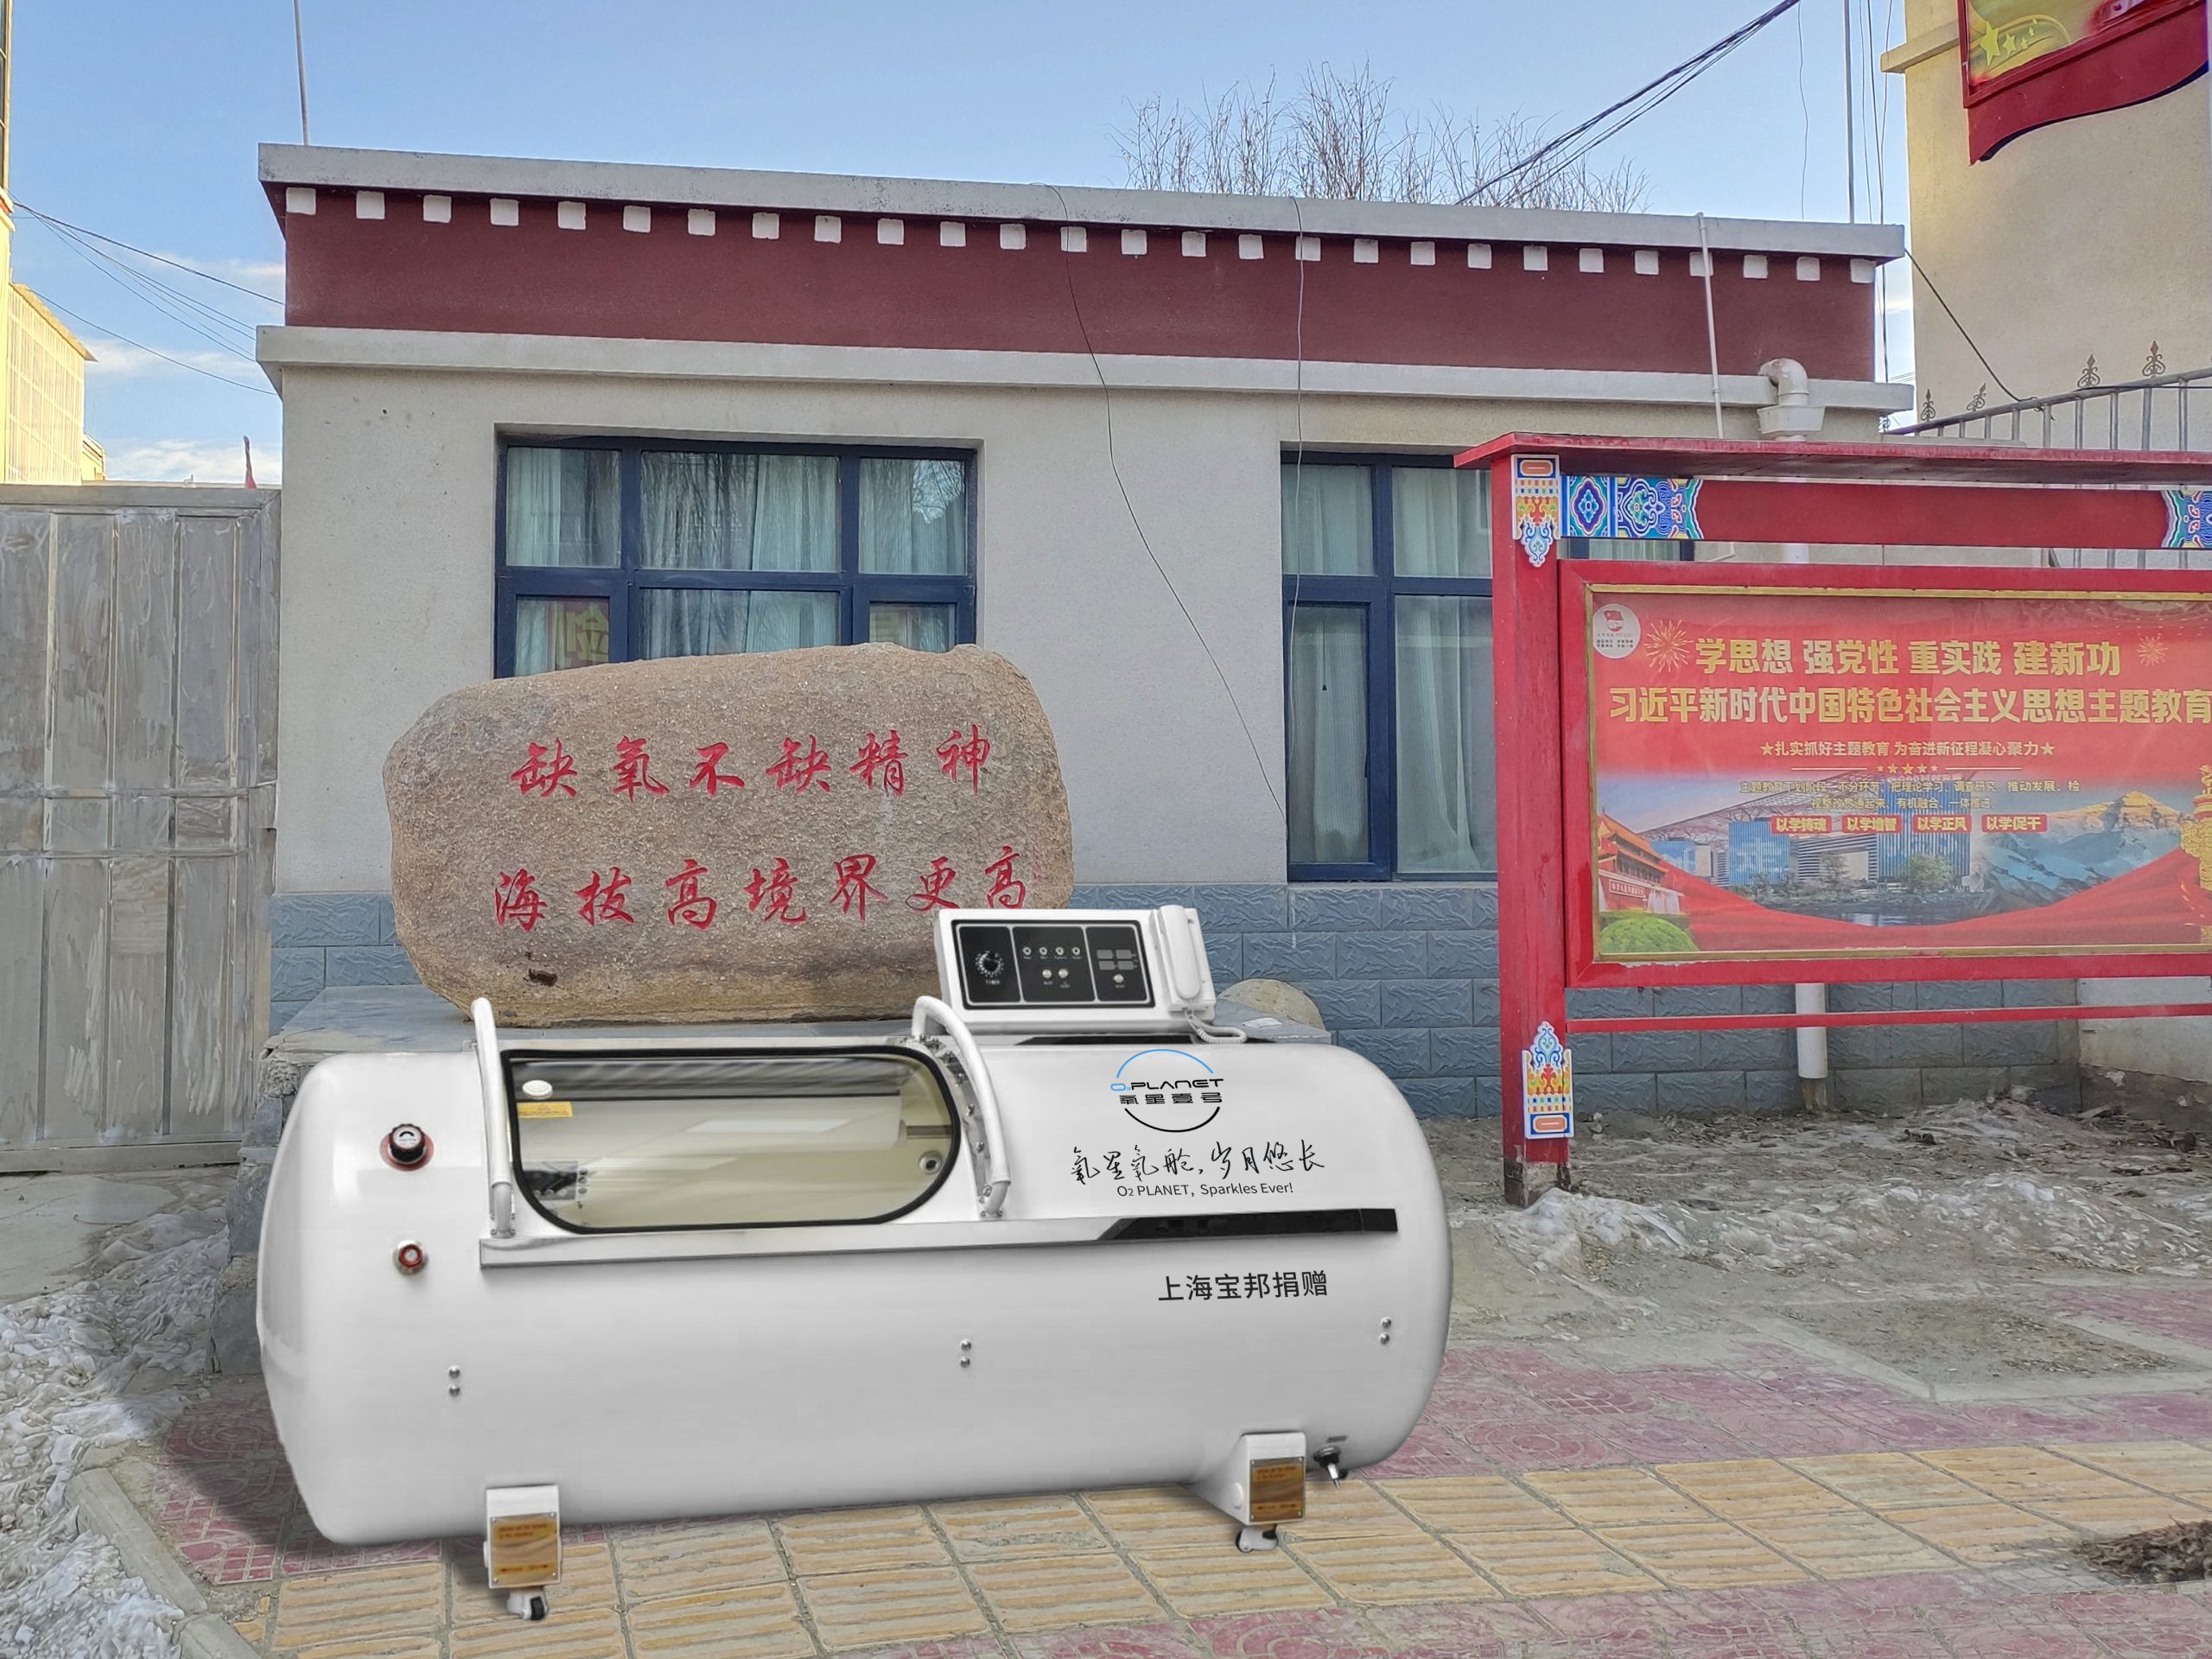 Plateau Oxygen Bar | Oxygen Star One Civilian Hyperbaric Oxygen Chamber throughout the Tibetan plateau and other regions